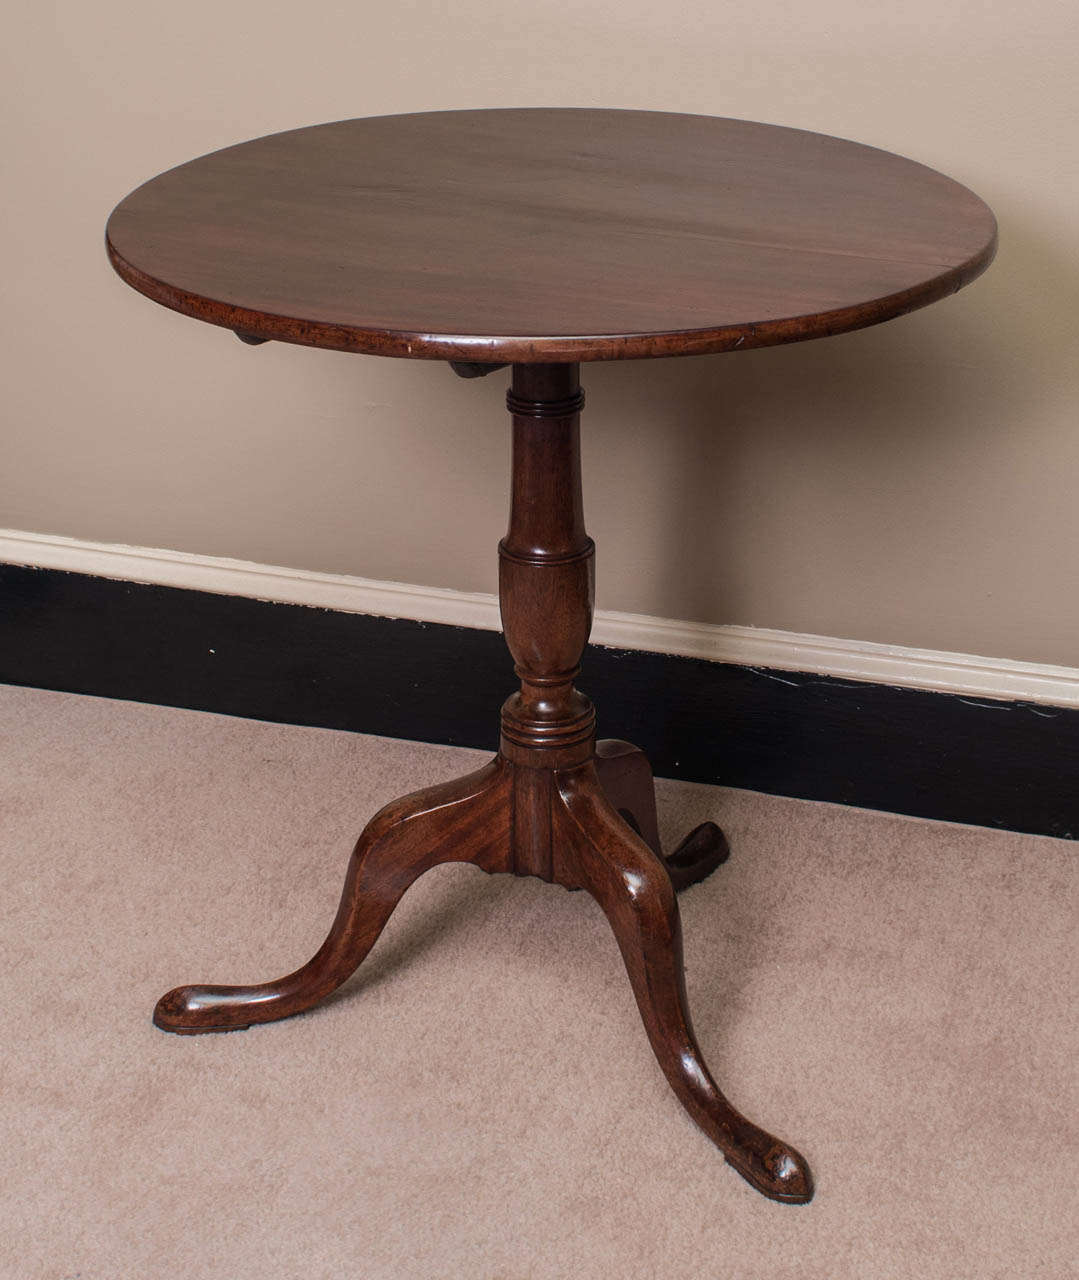 Excellent patina - rich glow to wood - good proportions -  beautiful turned pedestal and Queen Anne legs - French polish.  Wood aging shows in appropriate shrinkage: 27